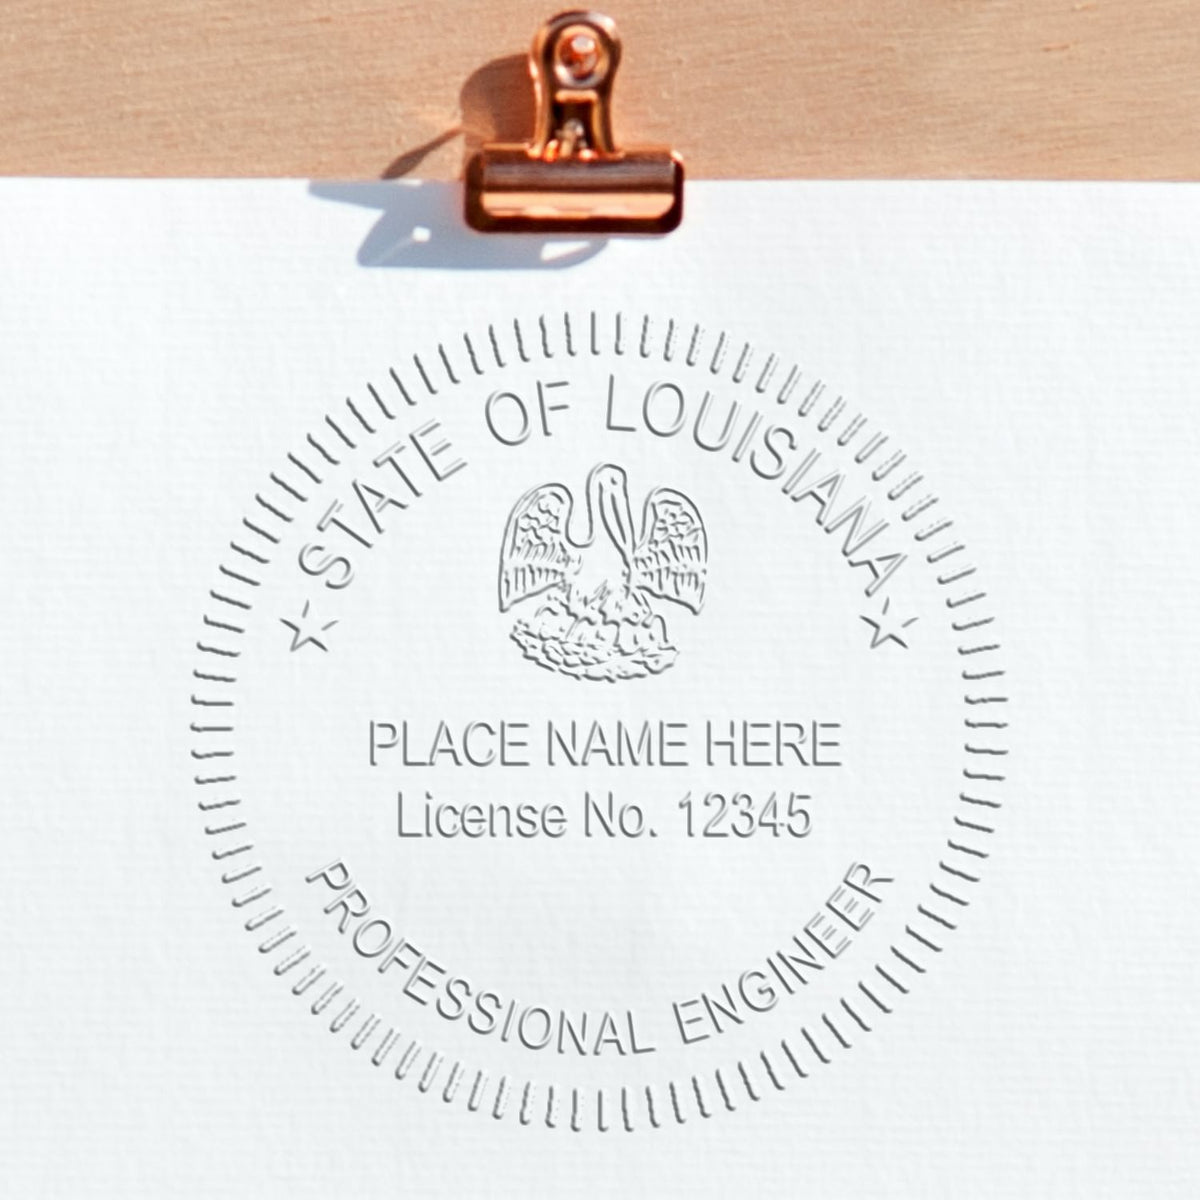 An alternative view of the State of Louisiana Extended Long Reach Engineer Seal stamped on a sheet of paper showing the image in use